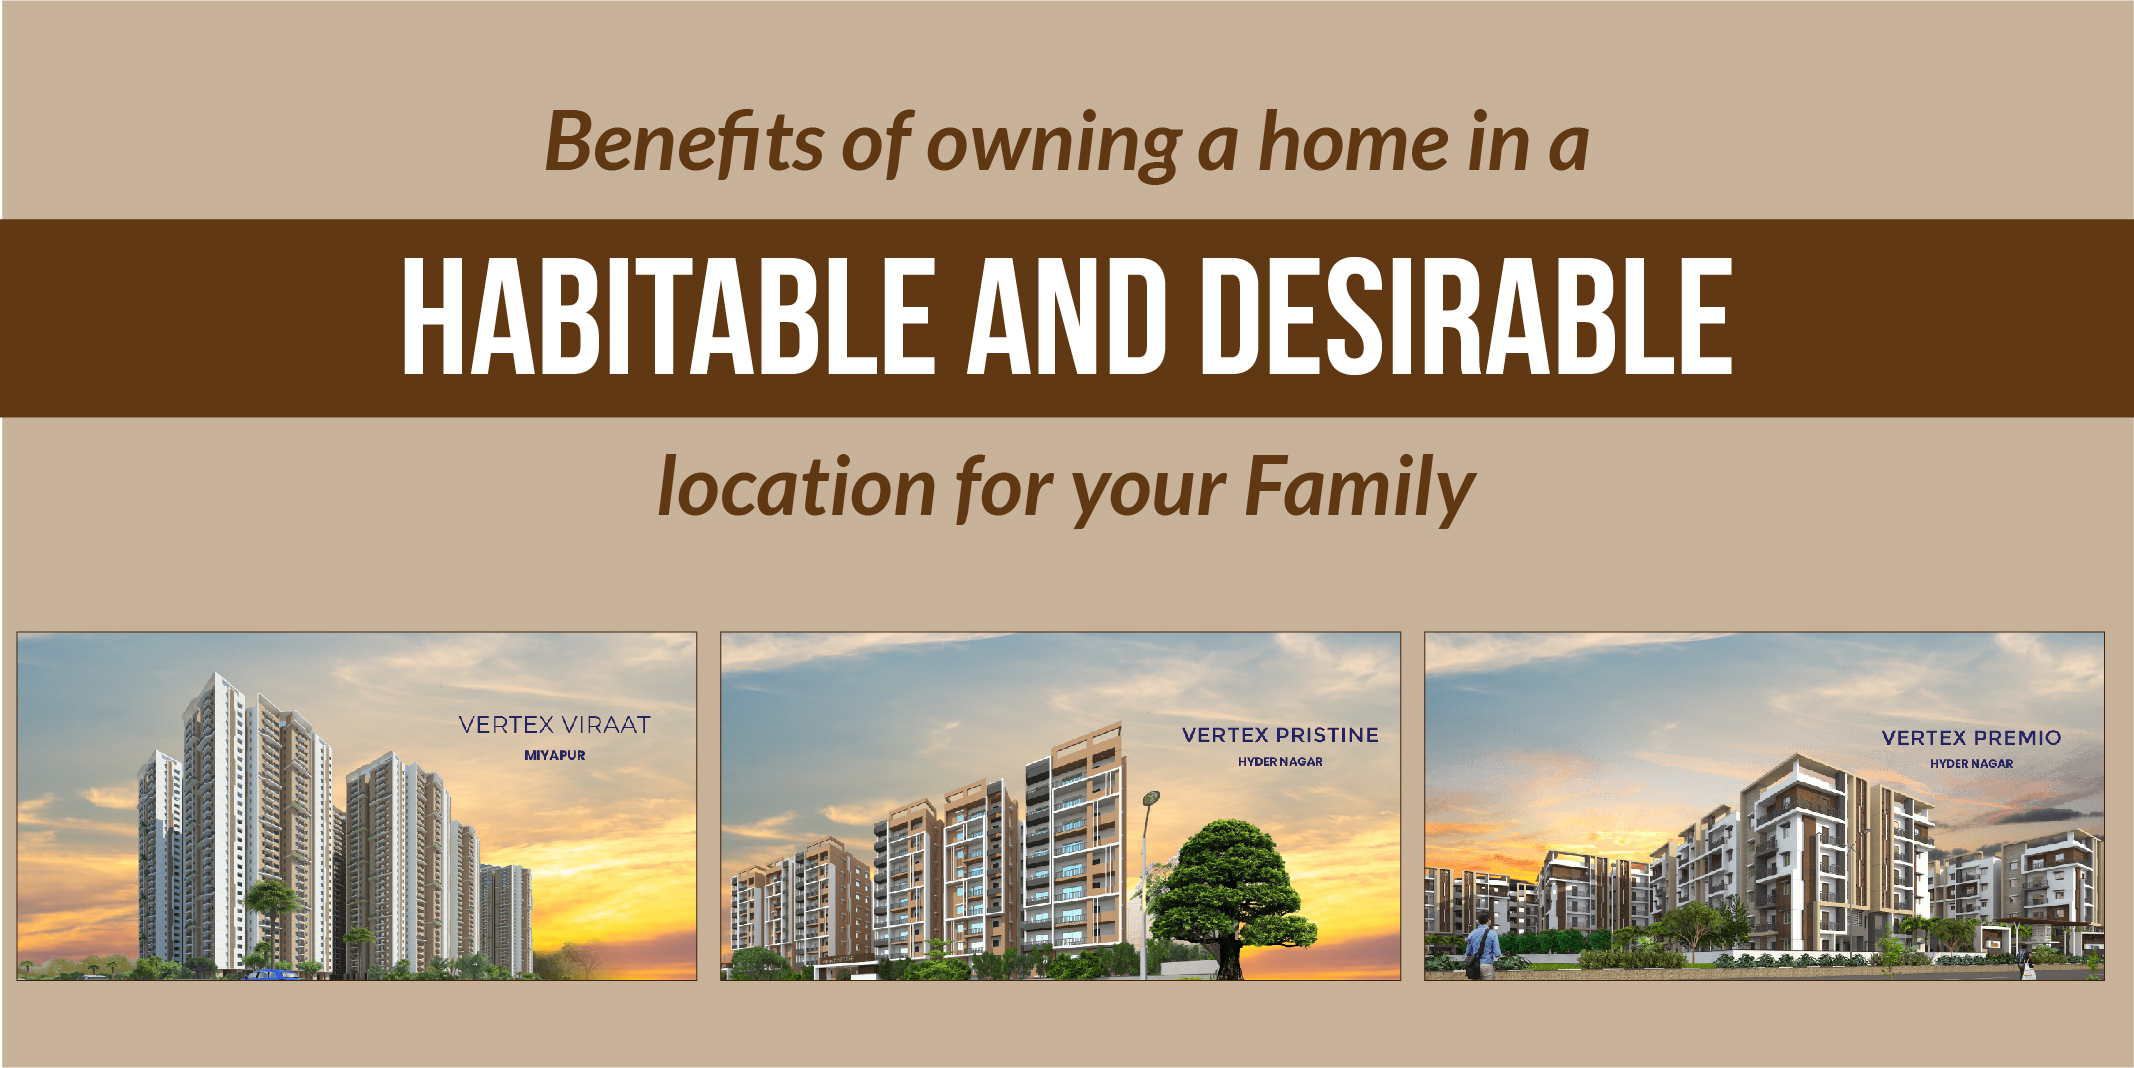 Benefits of Owning a Home in a Habitable and Desirable location for your Family